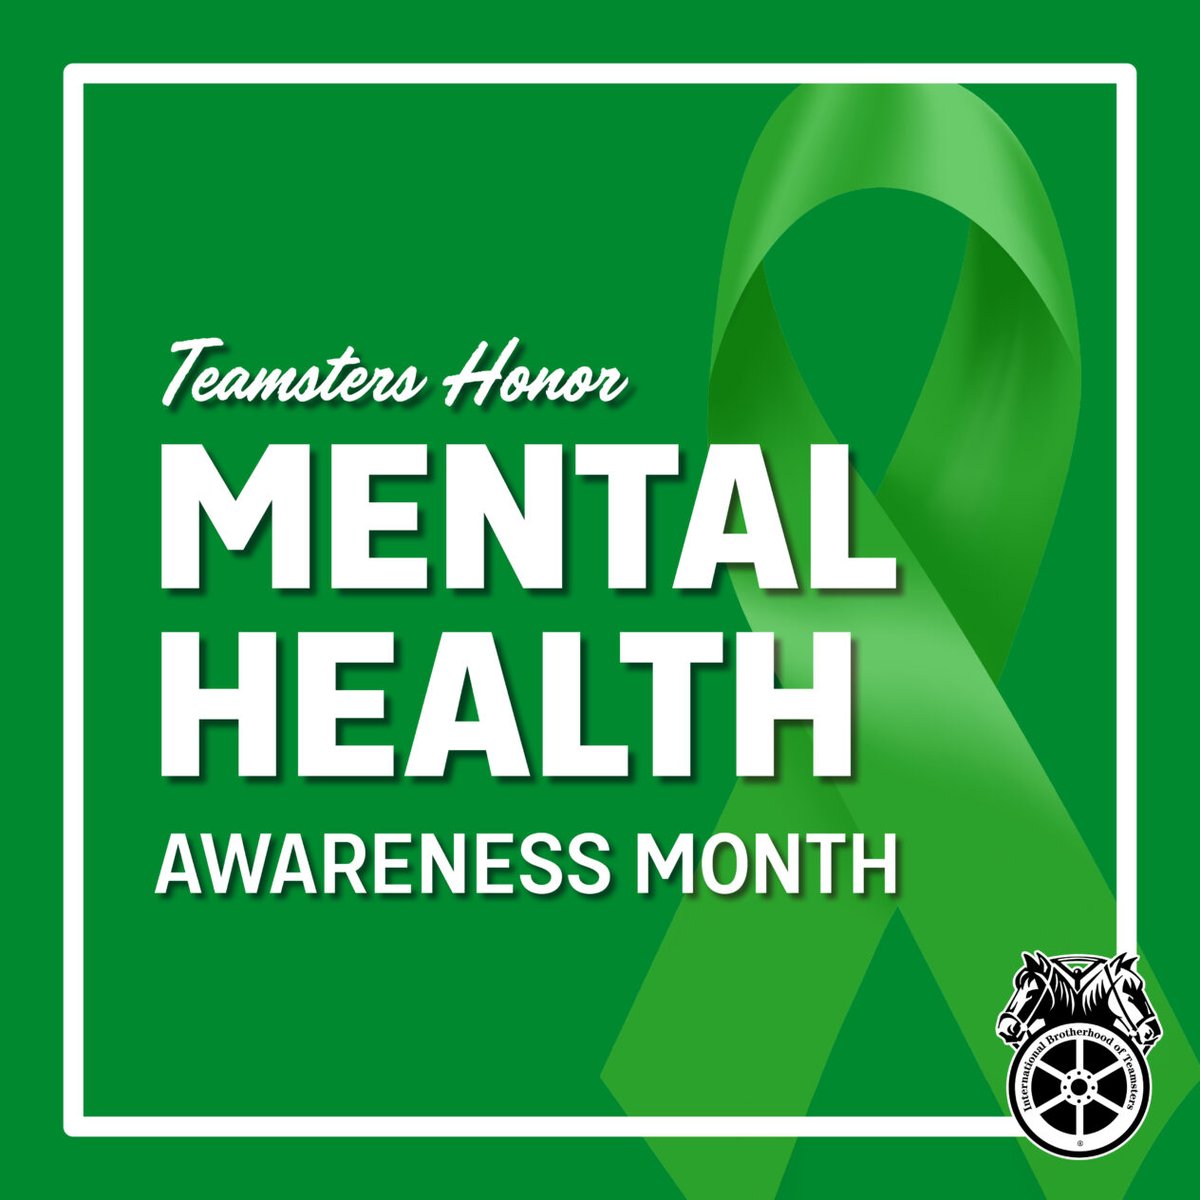 The International Brotherhood of #Teamsters is dedicated to helping create a society that recognizes the importance of mental health, reduces stigma, and provides accessible, compassionate, and evidence-based support and resources for everyone. May is #MentalHealthAwarenessMonth…